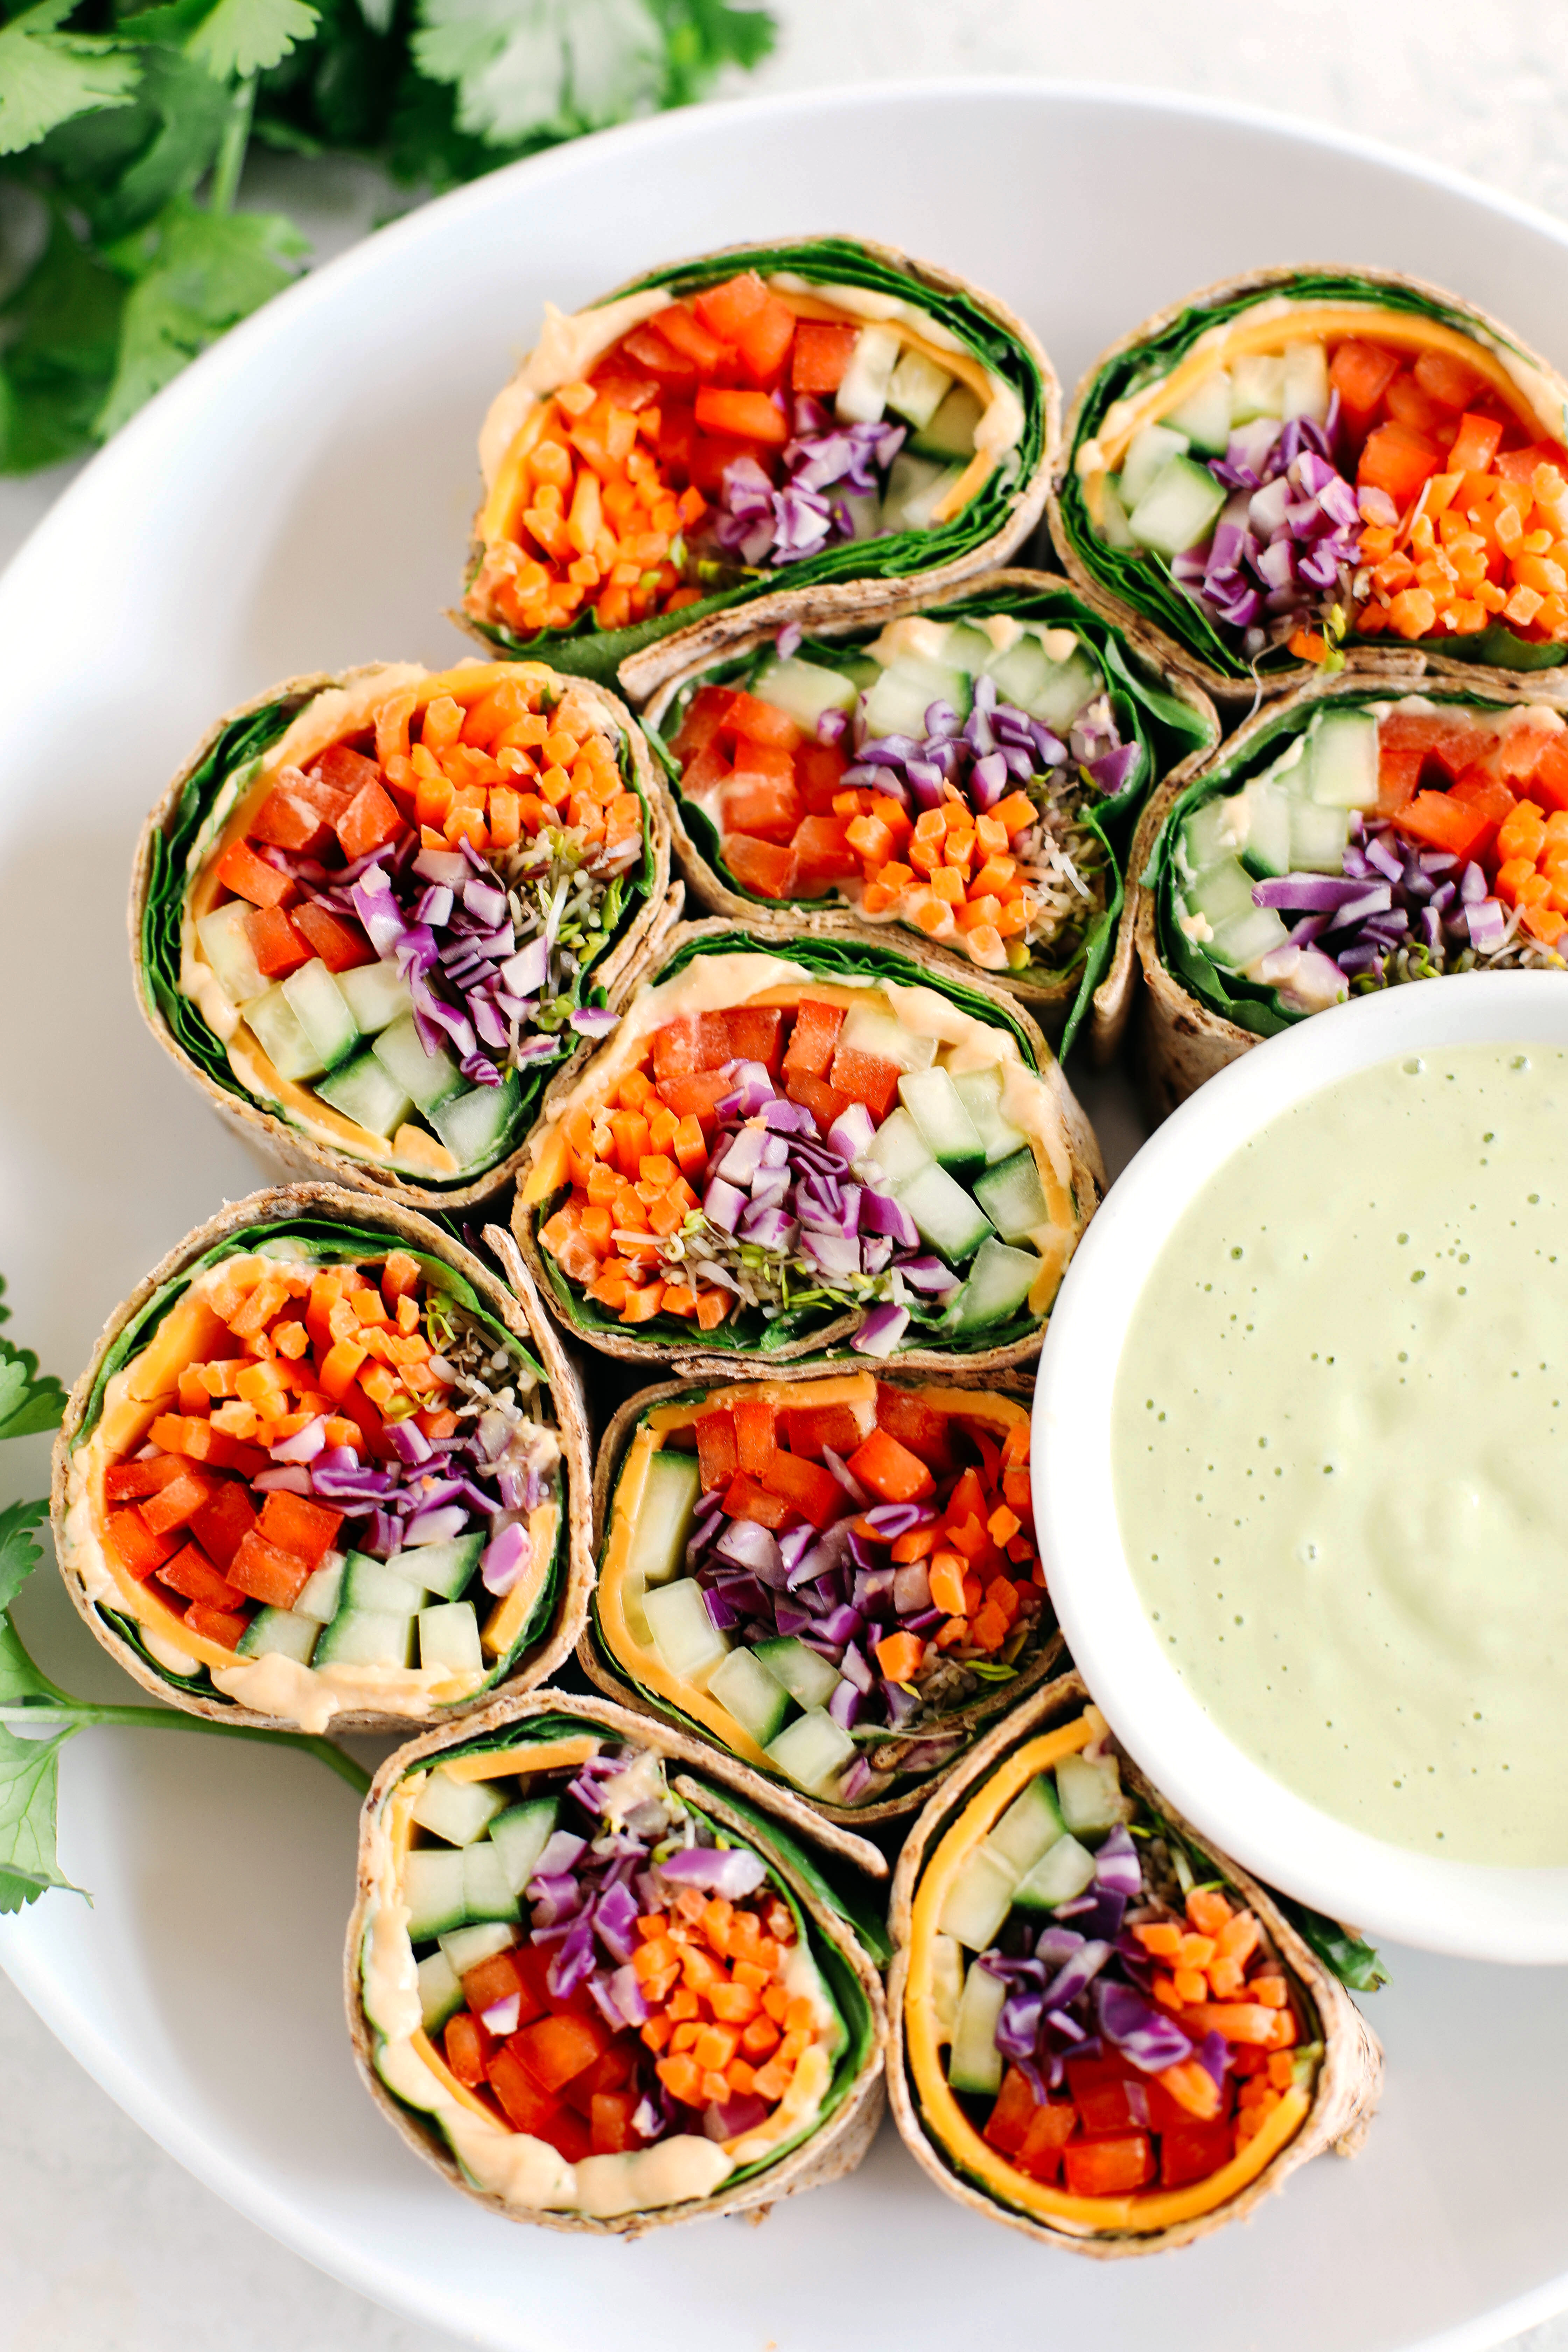 These colorful Rainbow Veggie Rolls are healthy, crunchy and loaded with tons of fresh veggies along with a delicious Ginger Avocado Dressing for dipping or drizzling!